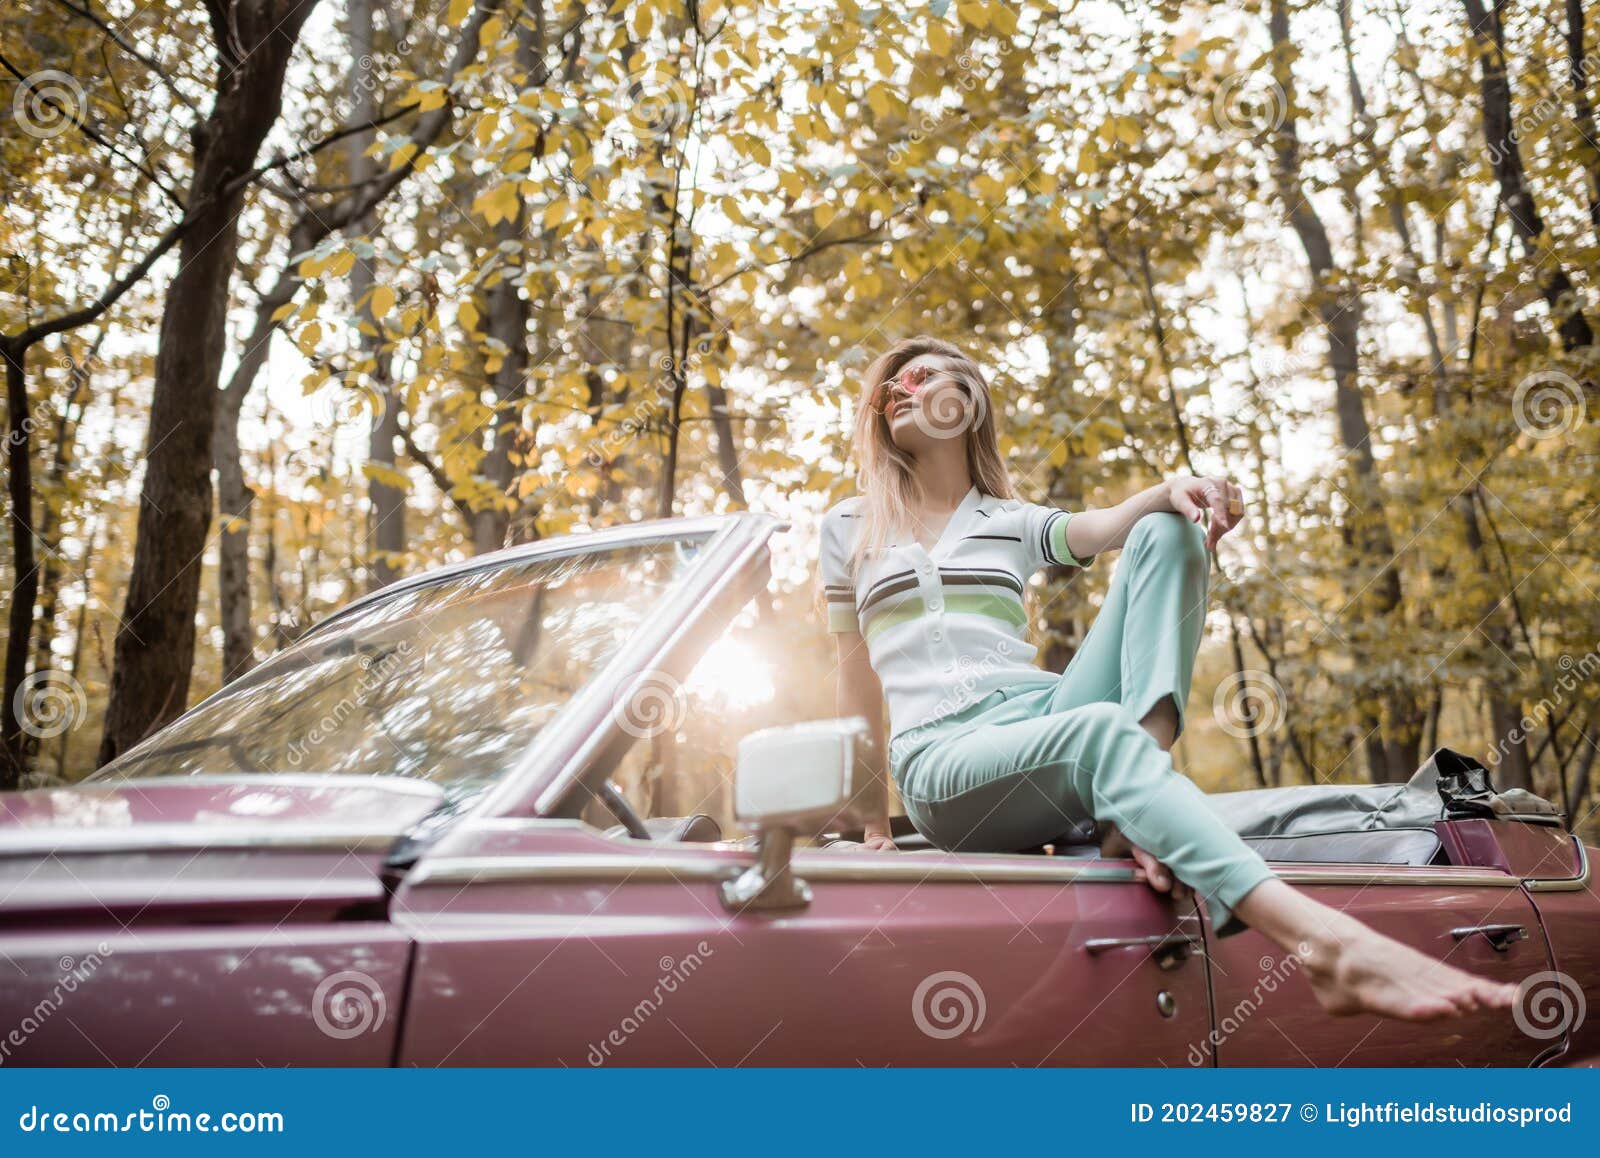 https://thumbs.dreamstime.com/z/smiling-barefoot-woman-sunglasses-posing-convertible-car-forest-barefoot-woman-sunglasses-posing-202459827.jpg